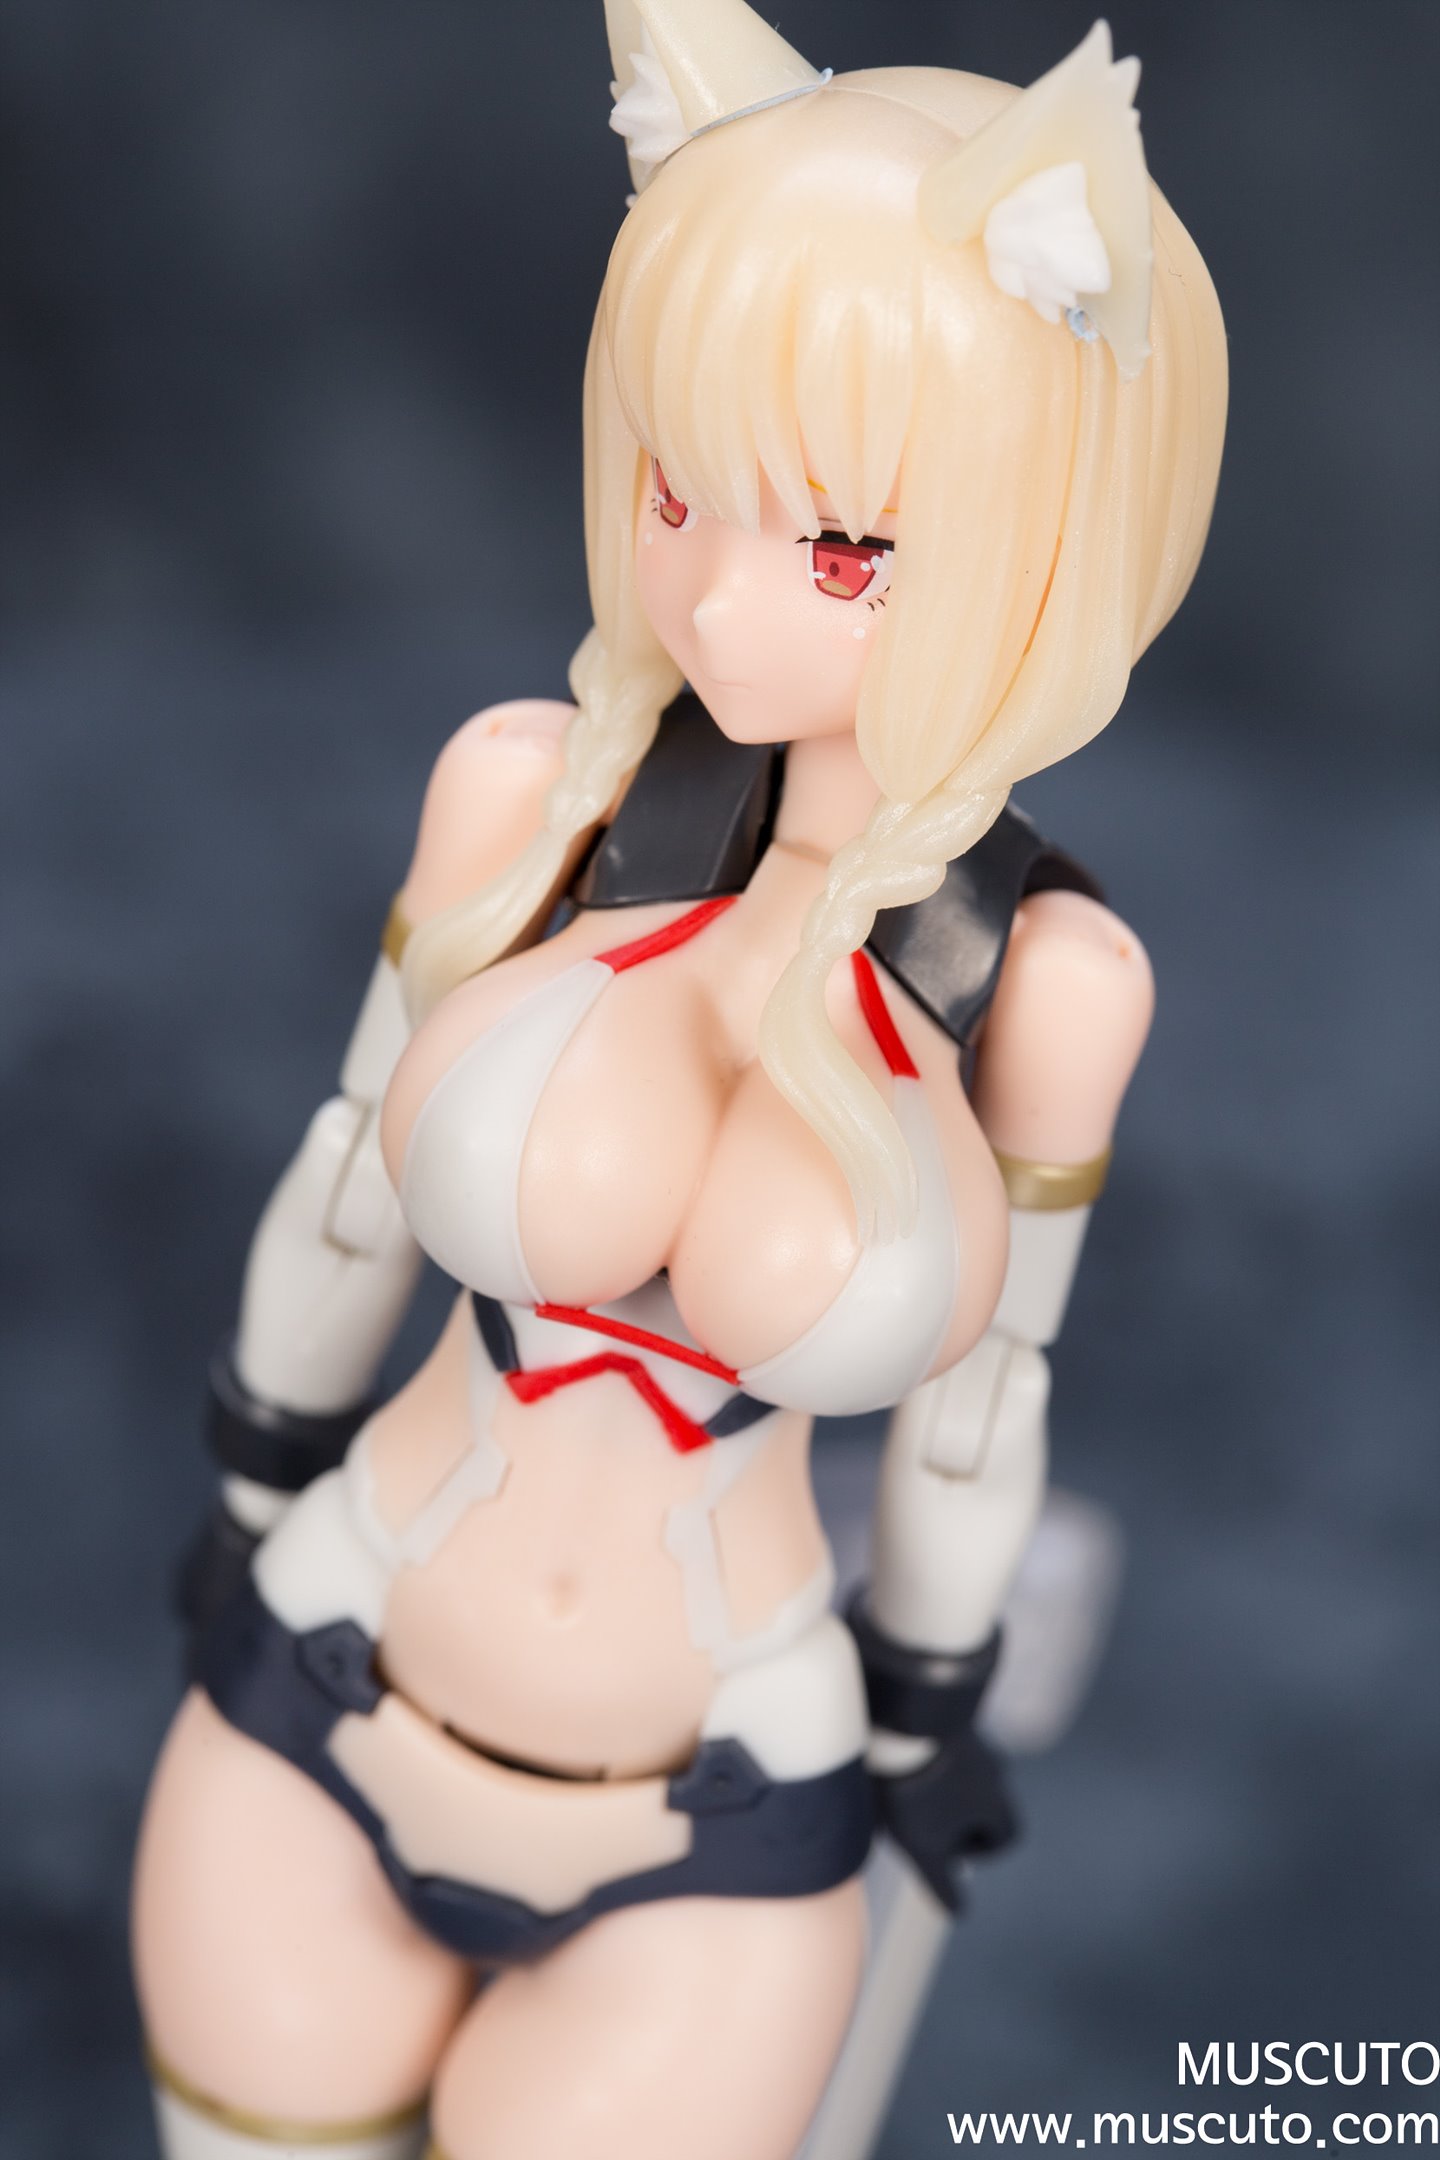 Muscuto - [GUIDE] BULLET KNIGHTS ランチャー Wide Body メガミ ...